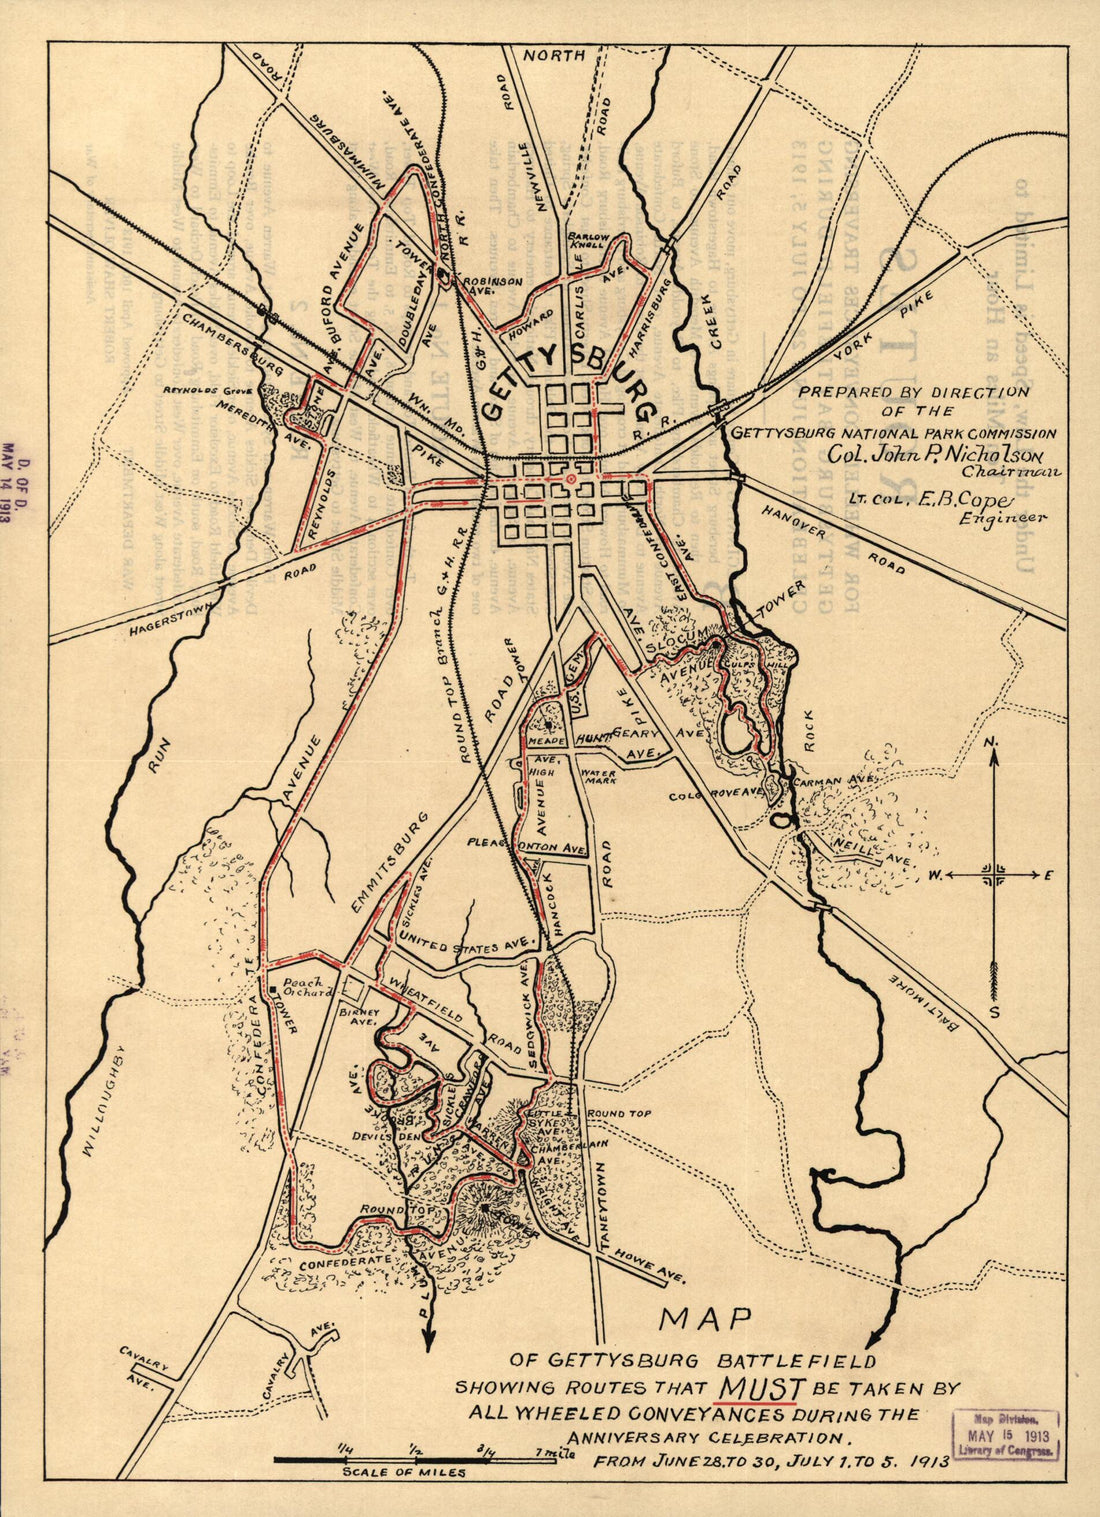 This old map of Map of Gettysburg Battlefield Showing Routes That Must Be Taken by All Wheeled Conveyances During the Anniversary Celebration, from June 28 to June 30, July 1 to 5, from 1913 was created by  Gettysburg National Military Park Commission in